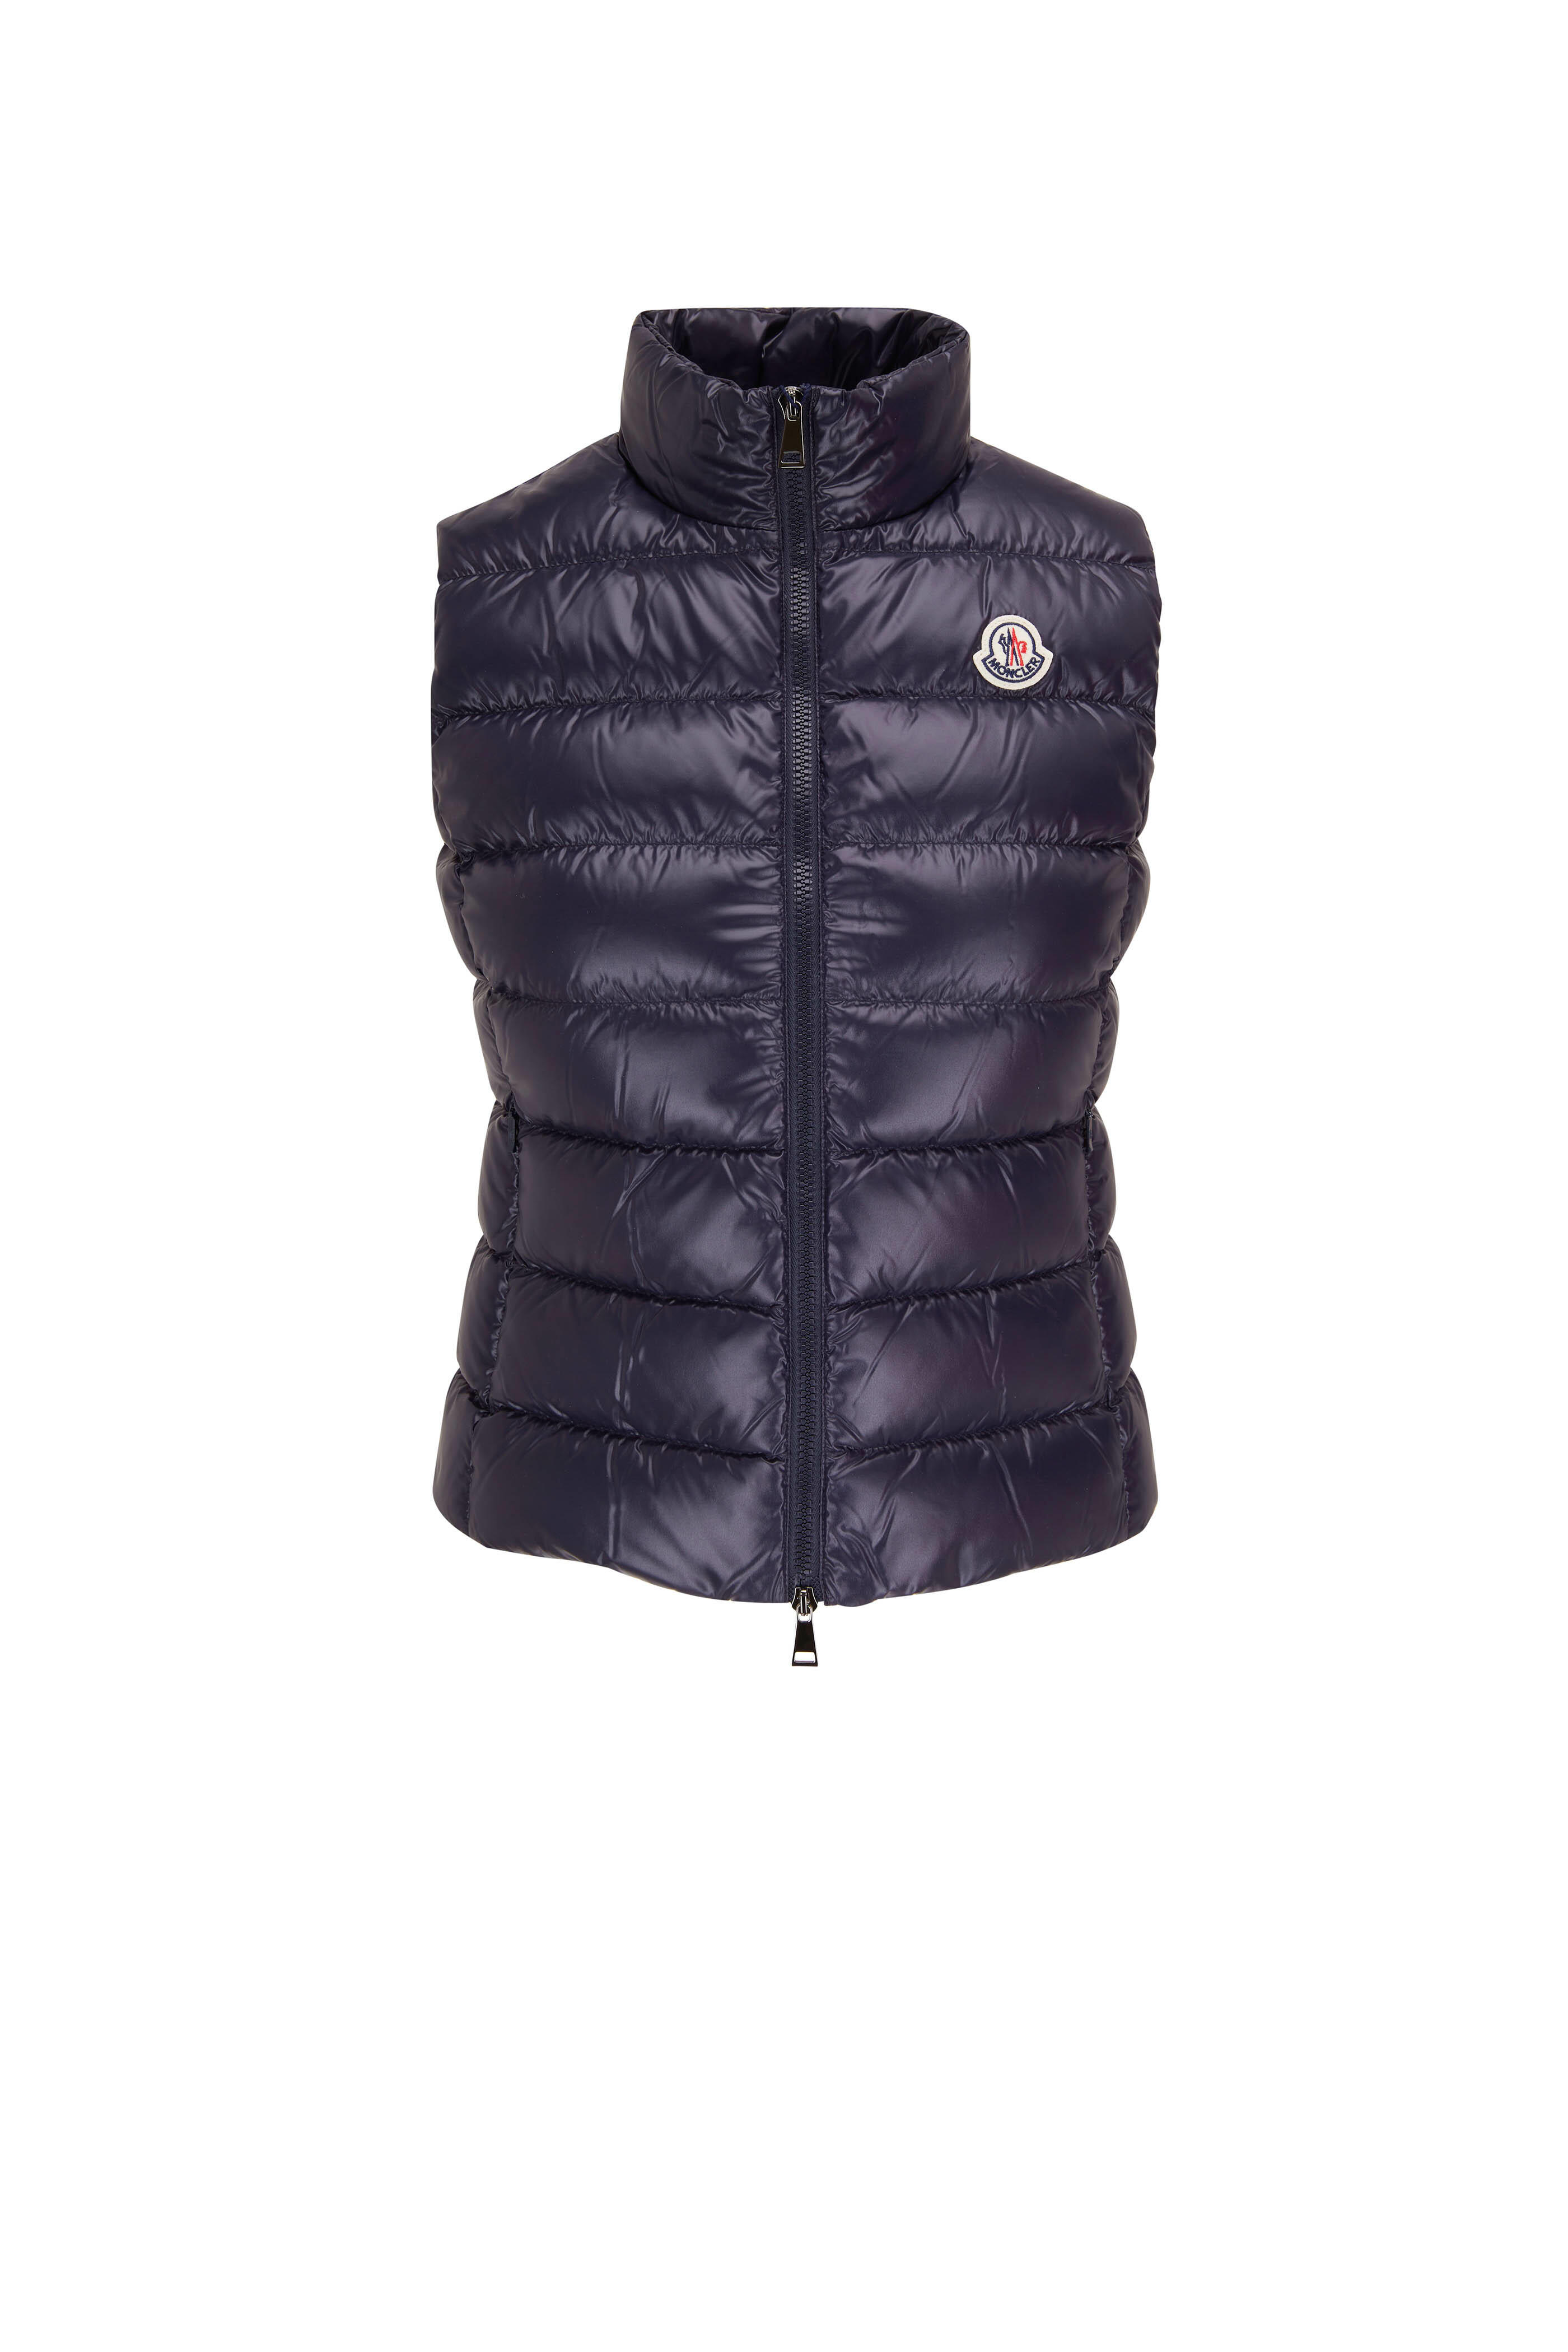 Moncler - Ghany Shiny Navy Blue Puffer Vest | Mitchell Stores